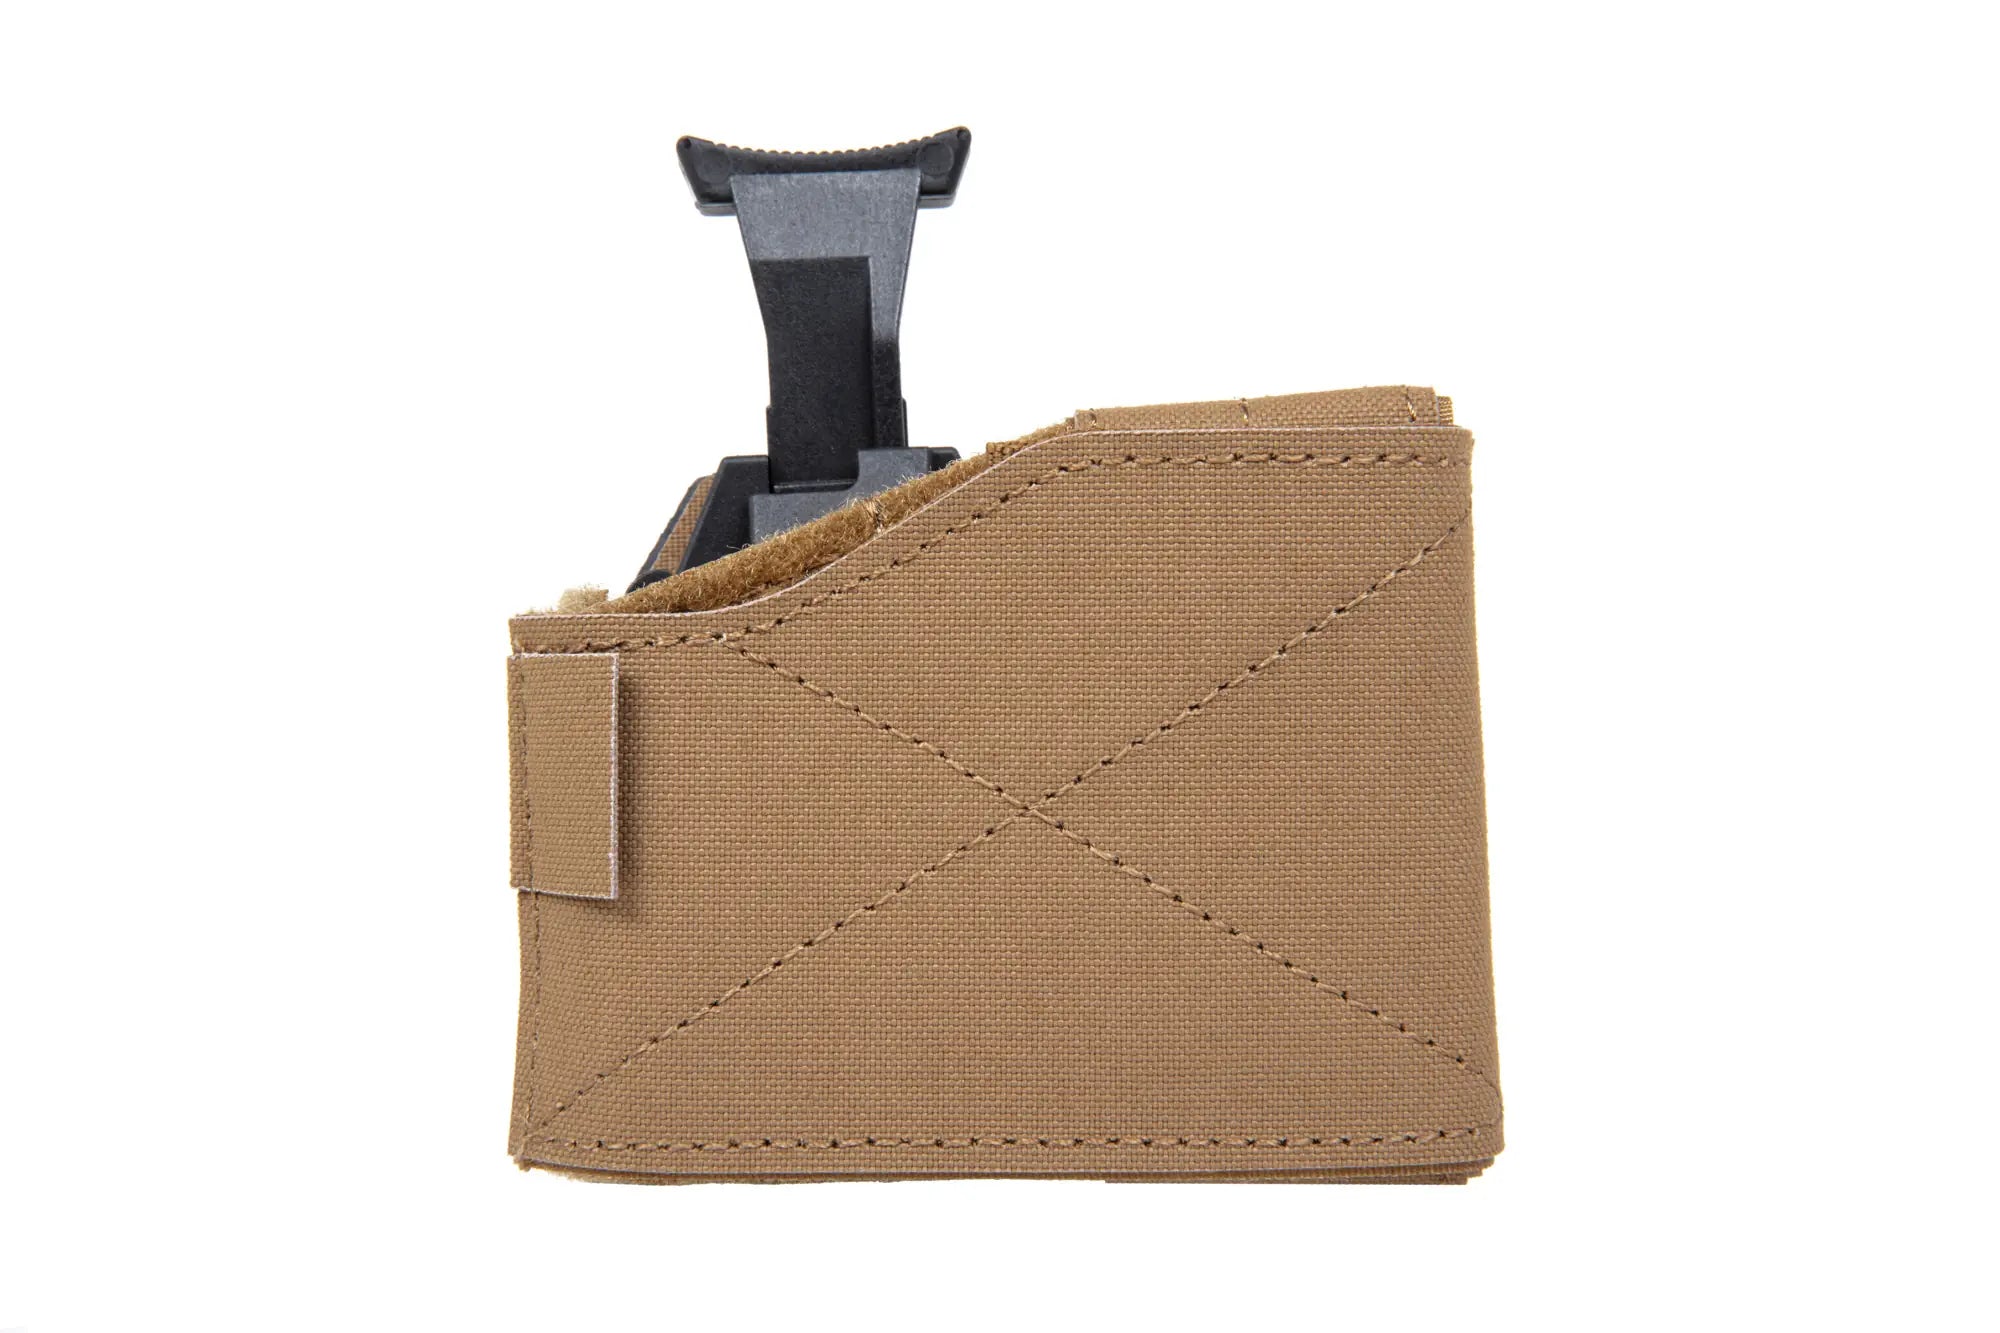 Wosport GB-80 universal holster Coyote Brown